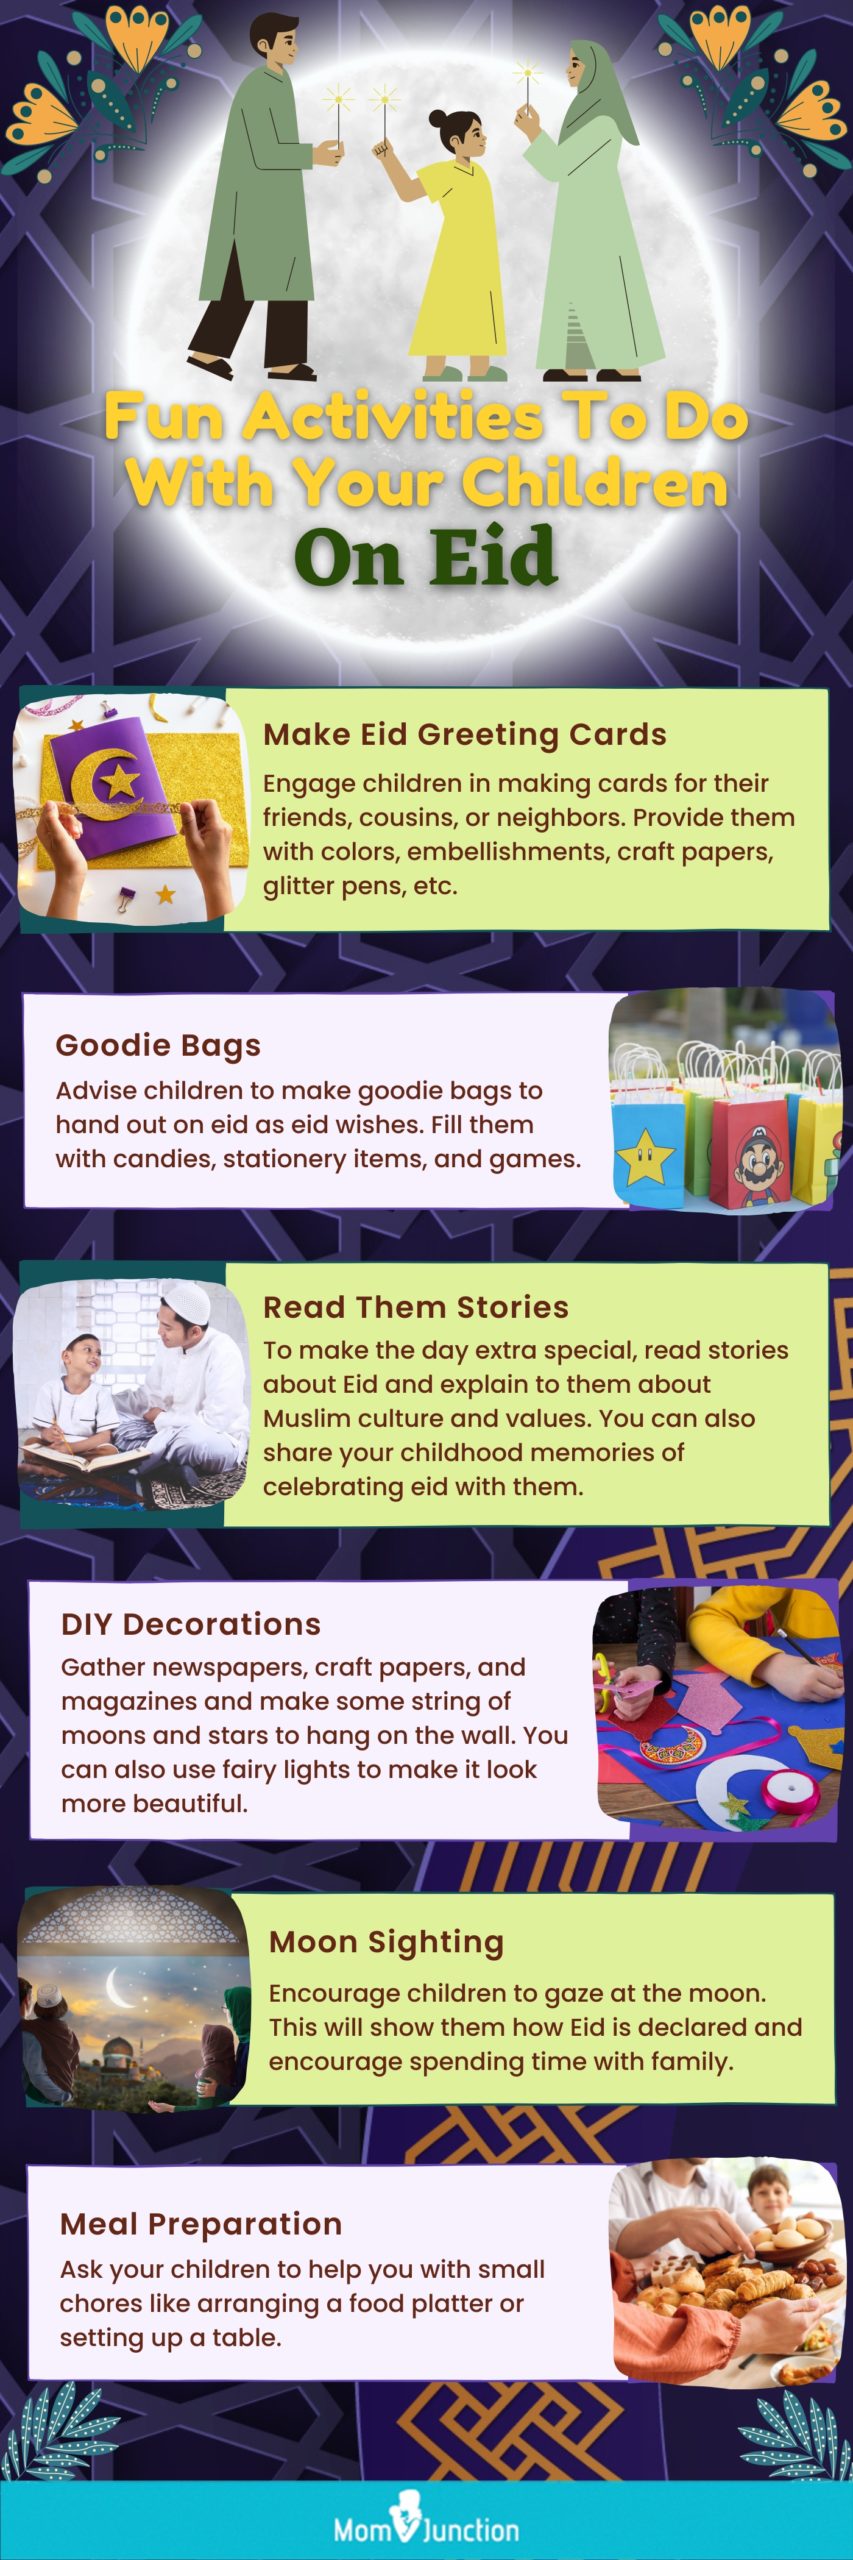 fun activities to do with your children on eid (infographic)